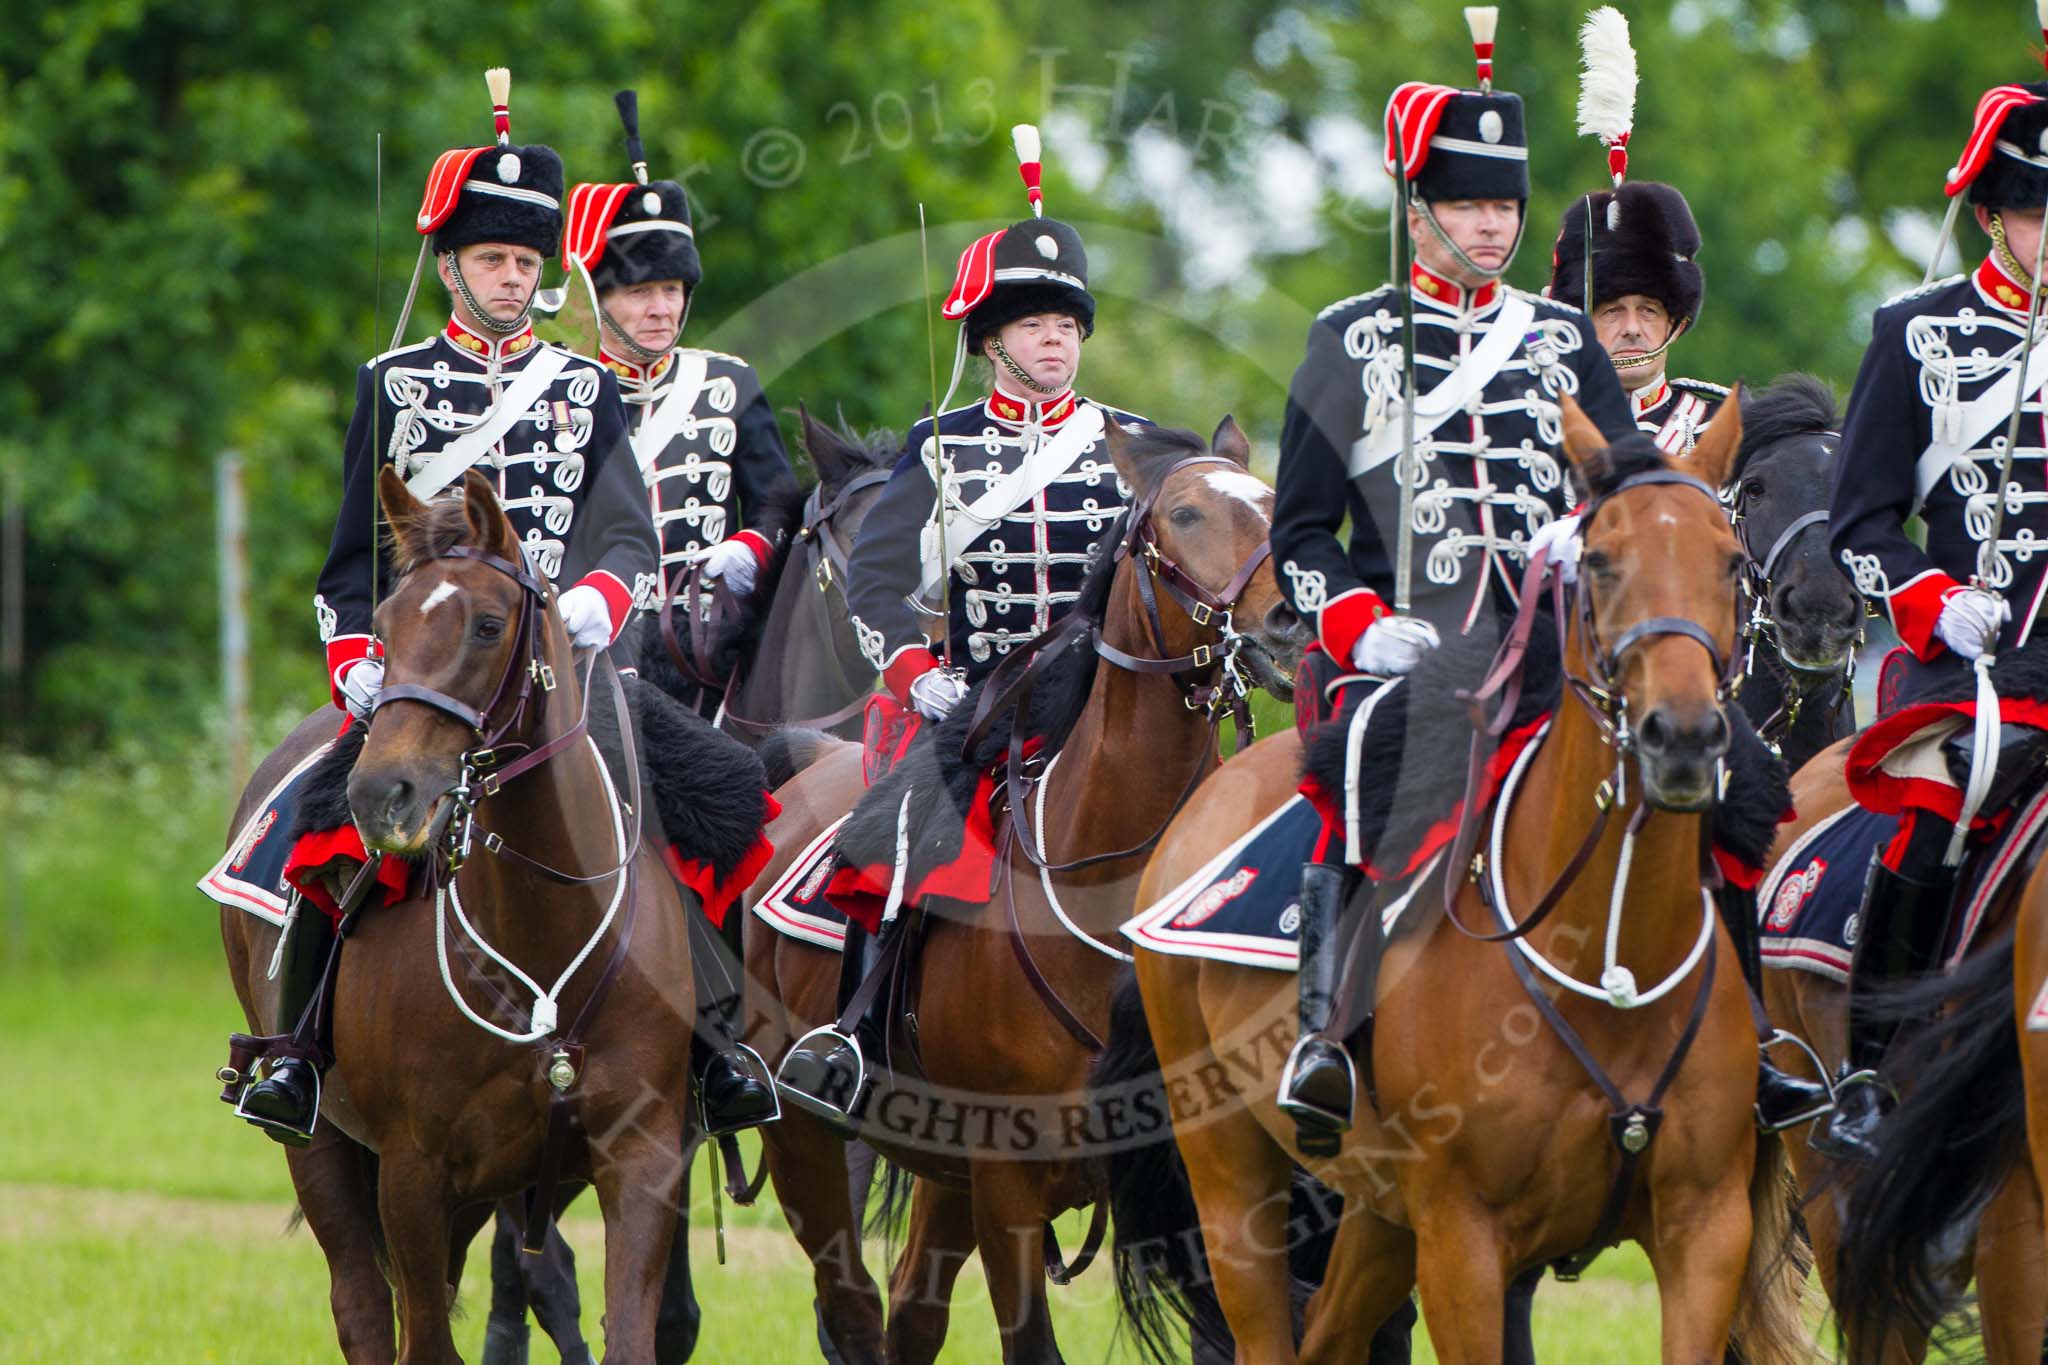 The Light Cavalry HAC Annual Review and Inspection 2013.
Windsor Great Park Review Ground,
Windsor,
Berkshire,
United Kingdom,
on 09 June 2013 at 13:35, image #449